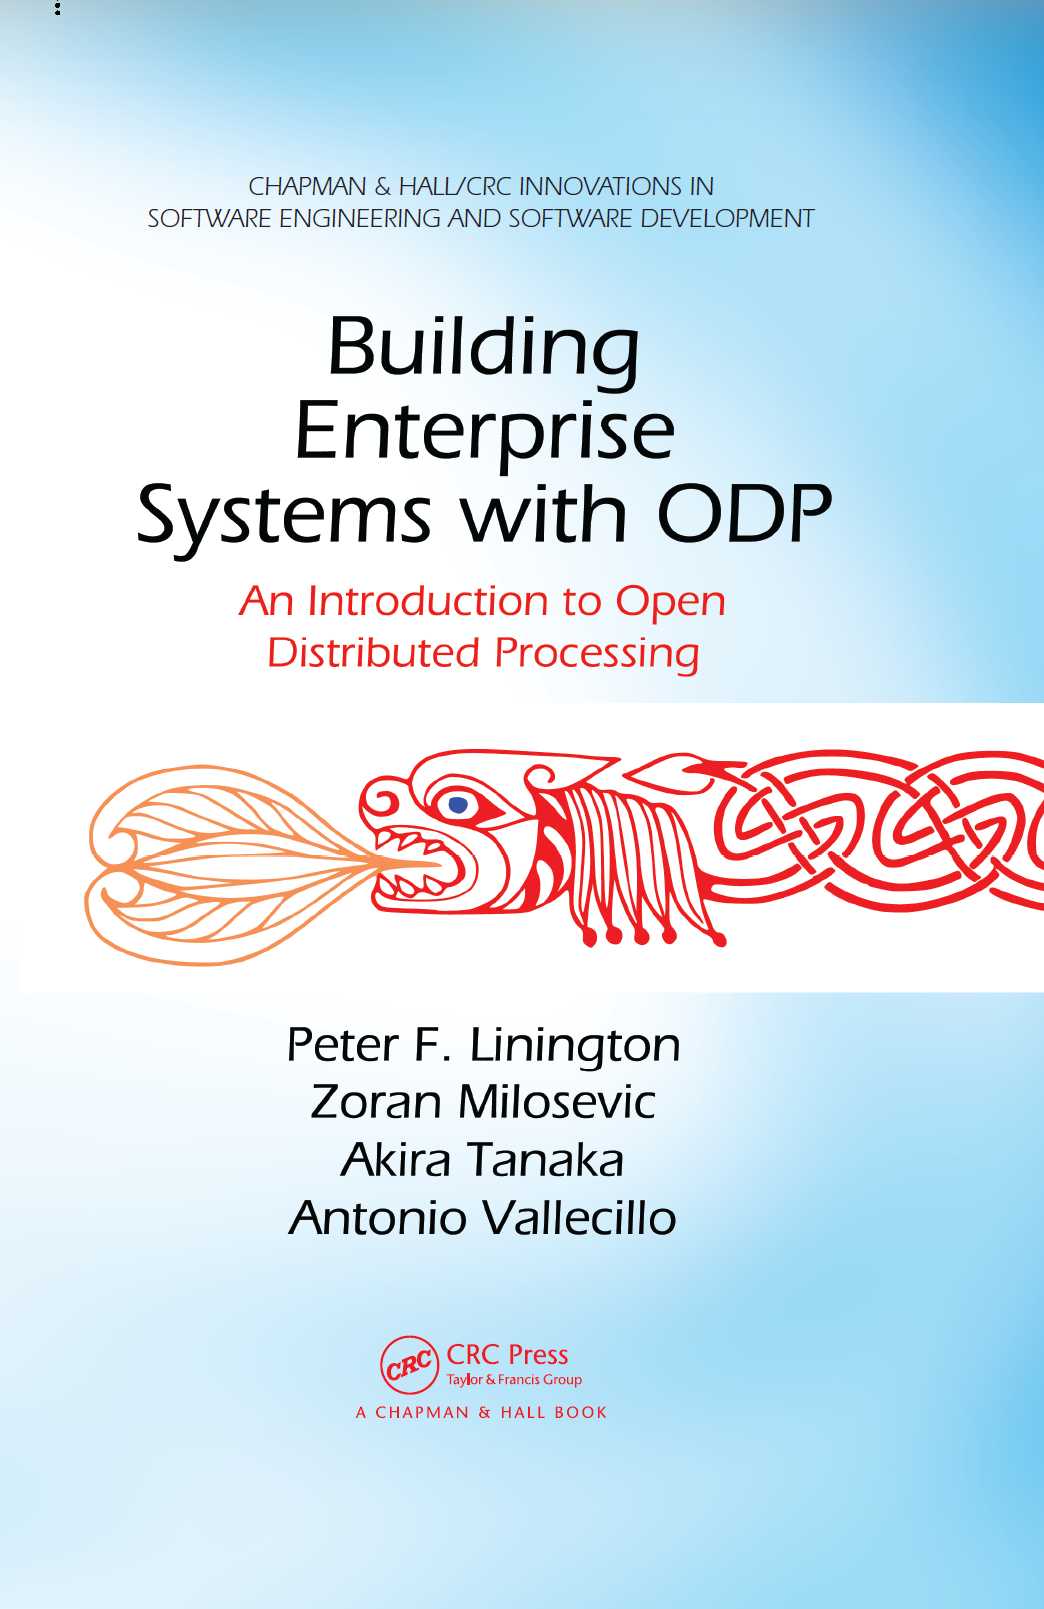 New book: Building Enterprise Systems with ODP